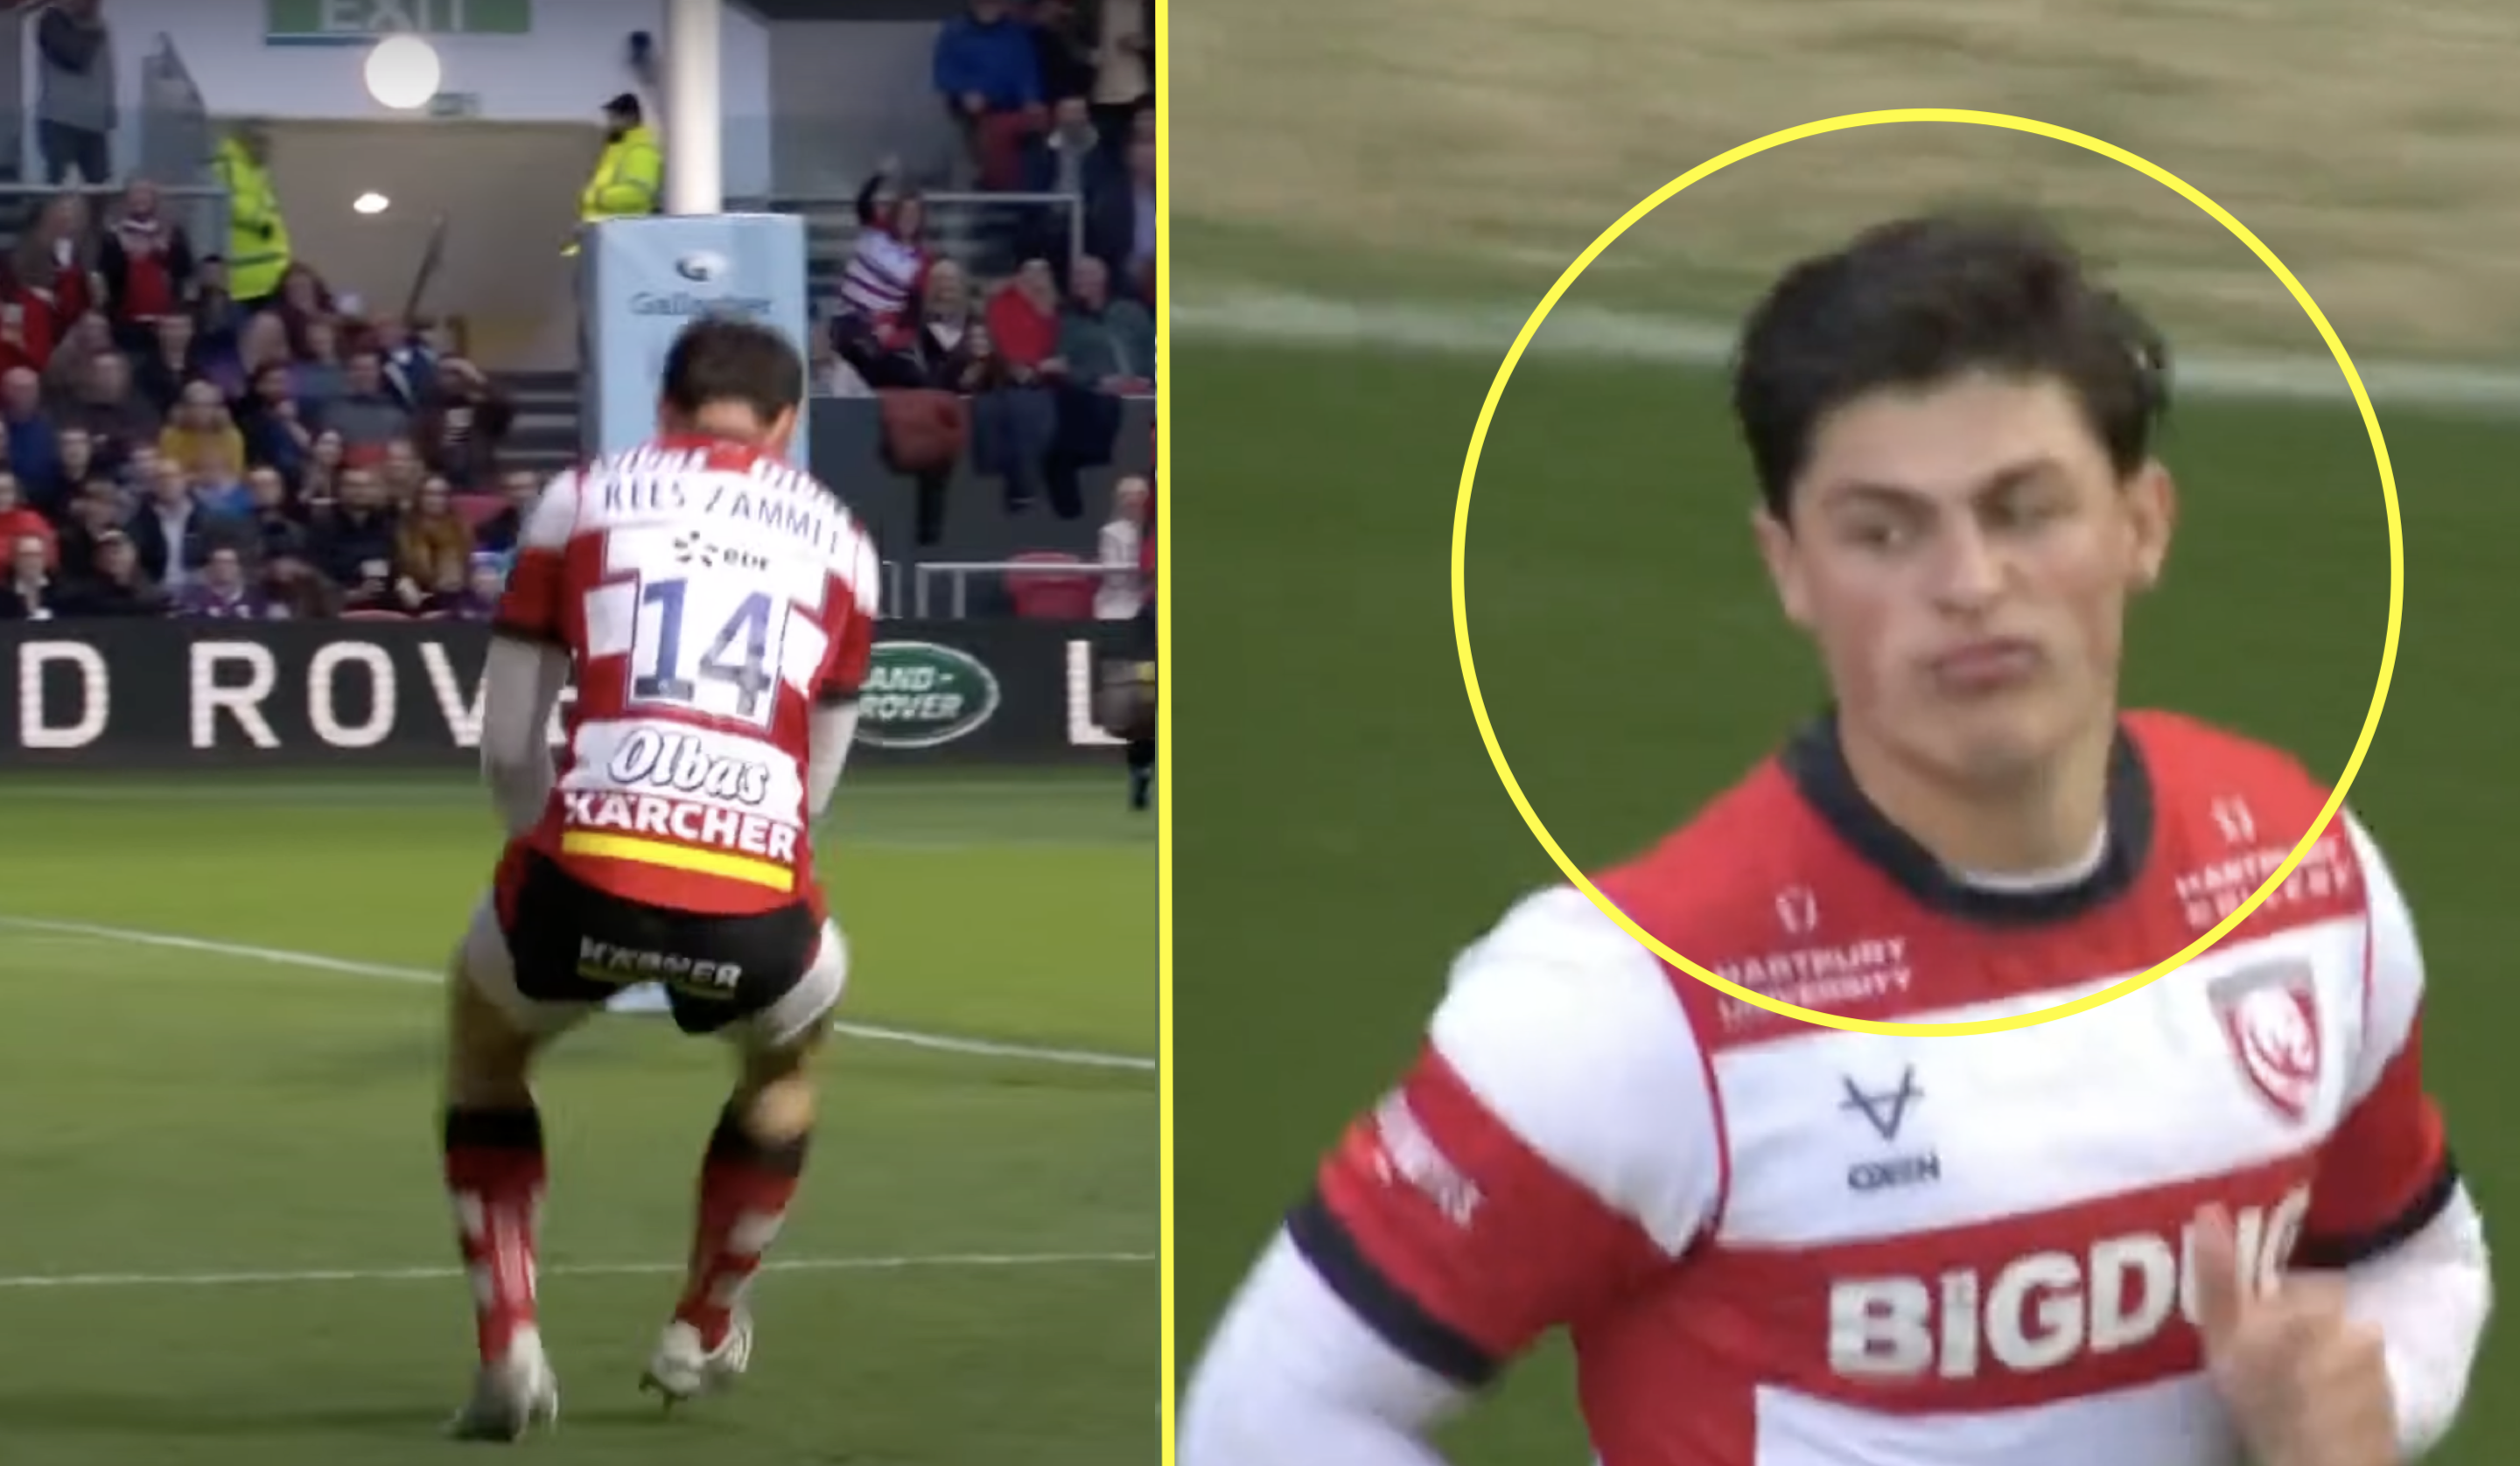 Rees-Zammit took next step to becoming world's best winger against Bristol